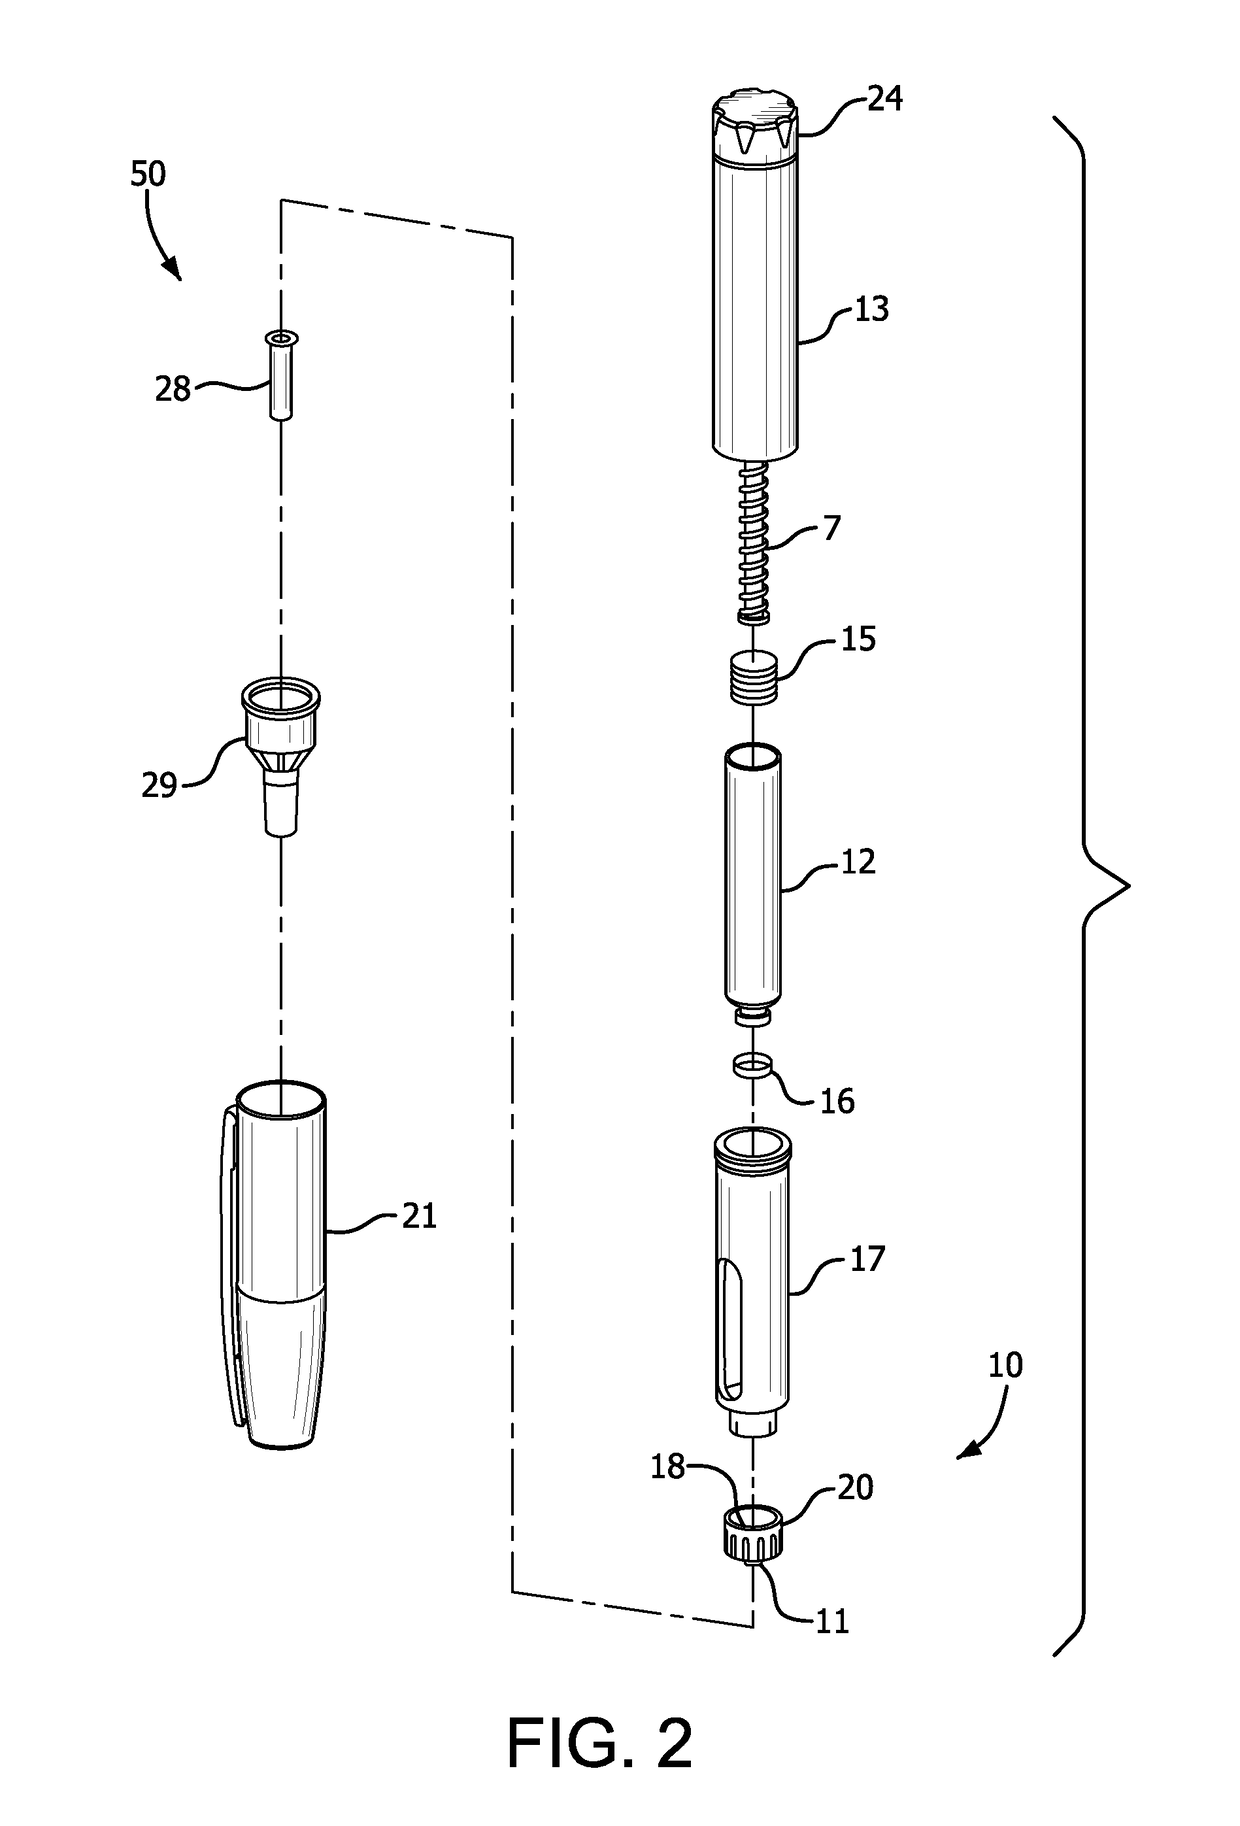 Systems, apparatuses and methods to encourage injection site rotation and prevent lipodystrophy from repeated injections to a body area